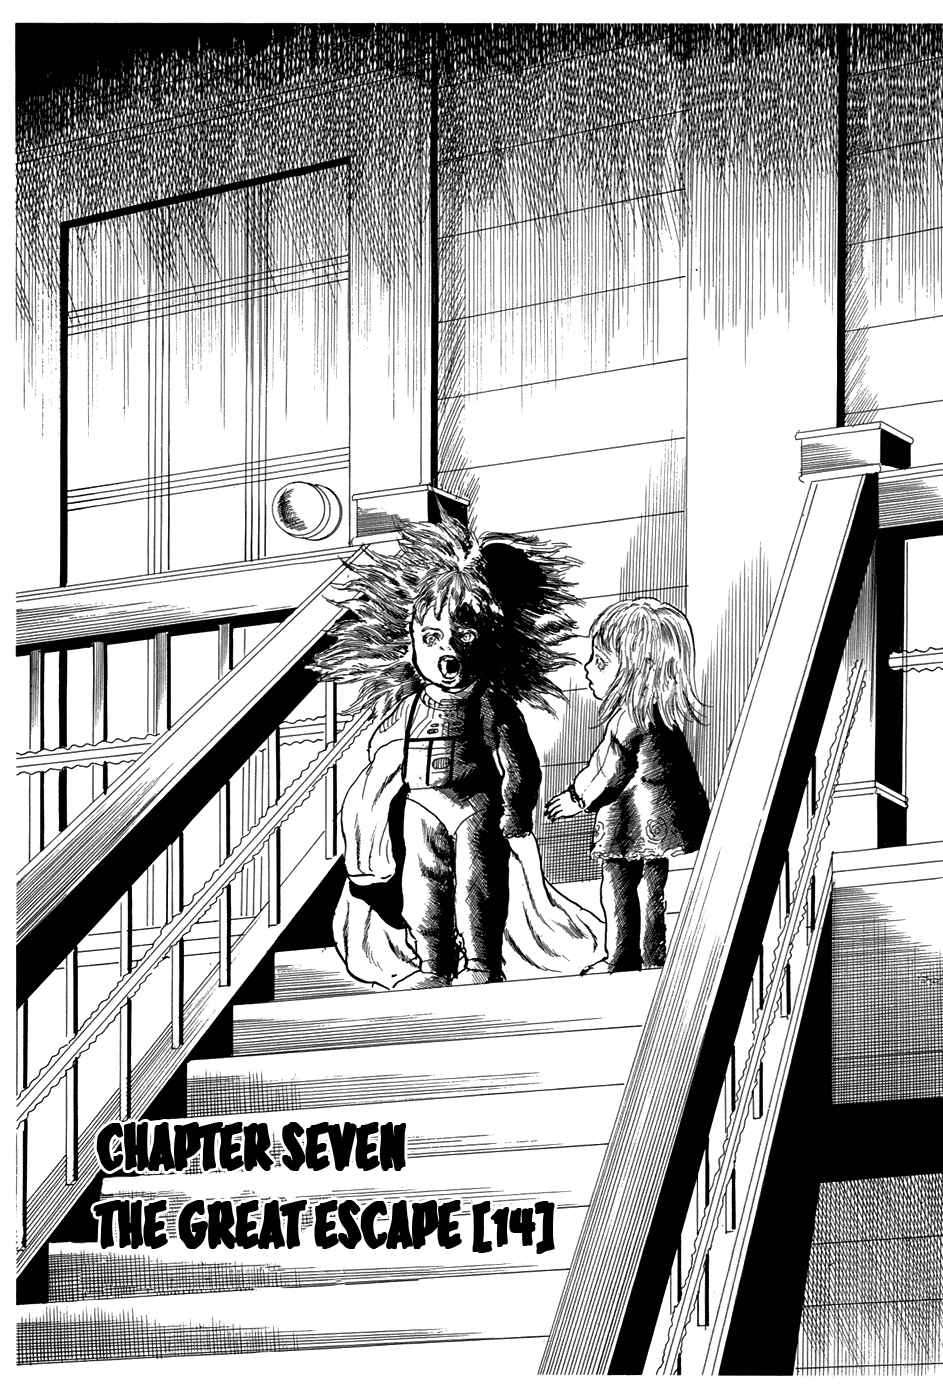 Fourteen Vol. 10 Ch. 193 The Great Escape (14)